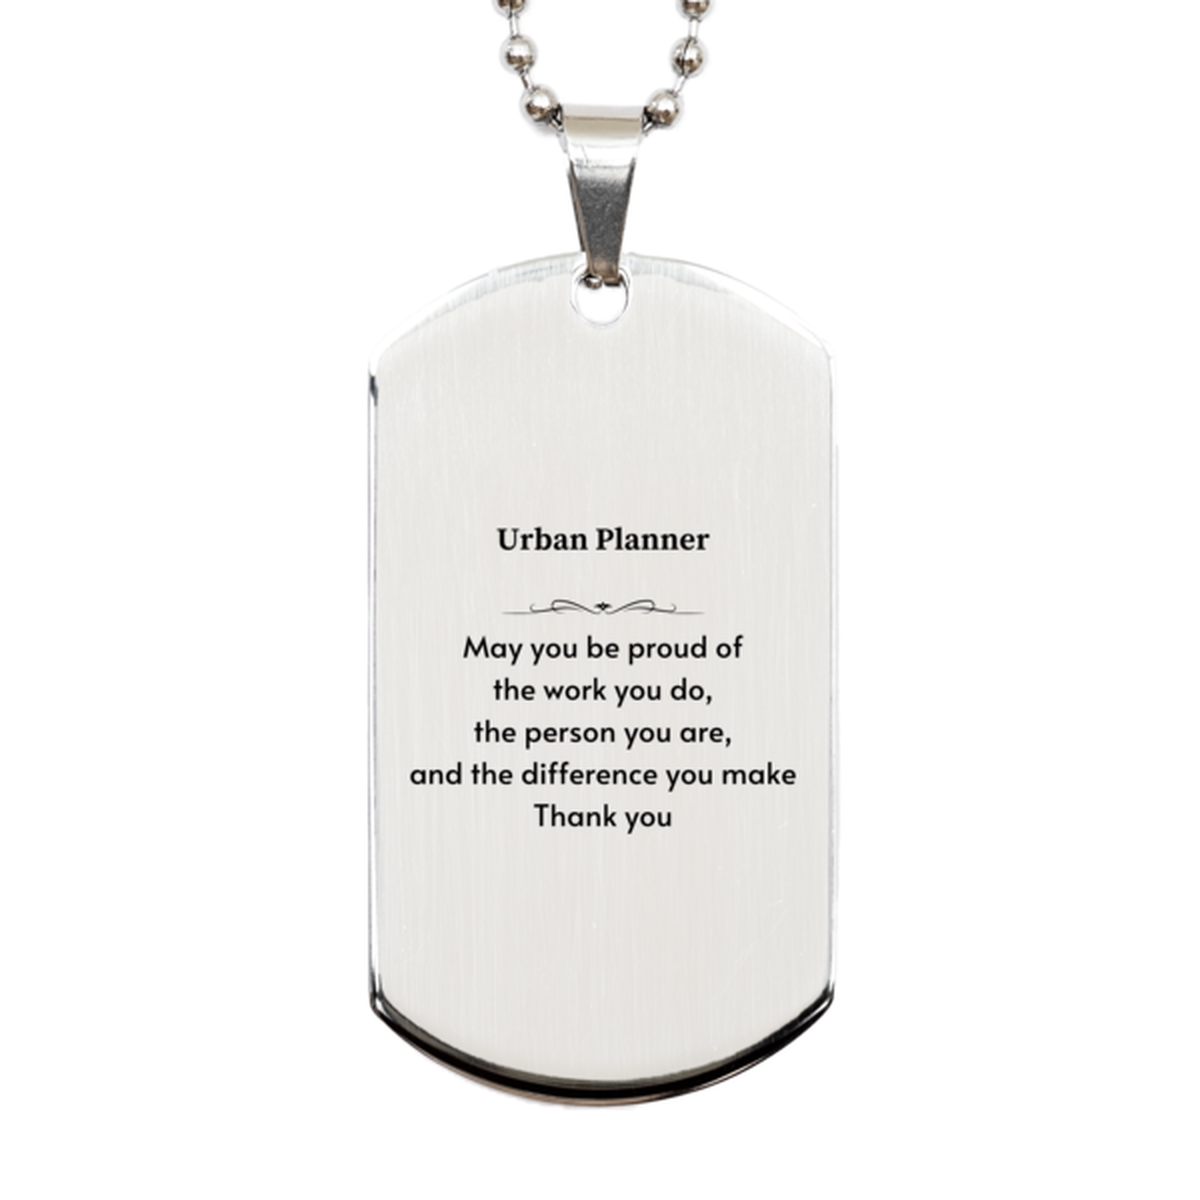 Heartwarming Silver Dog Tag Retirement Coworkers Gifts for Urban Planner, Urban Planner May You be proud of the work you do, the person you are Gifts for Boss Men Women Friends